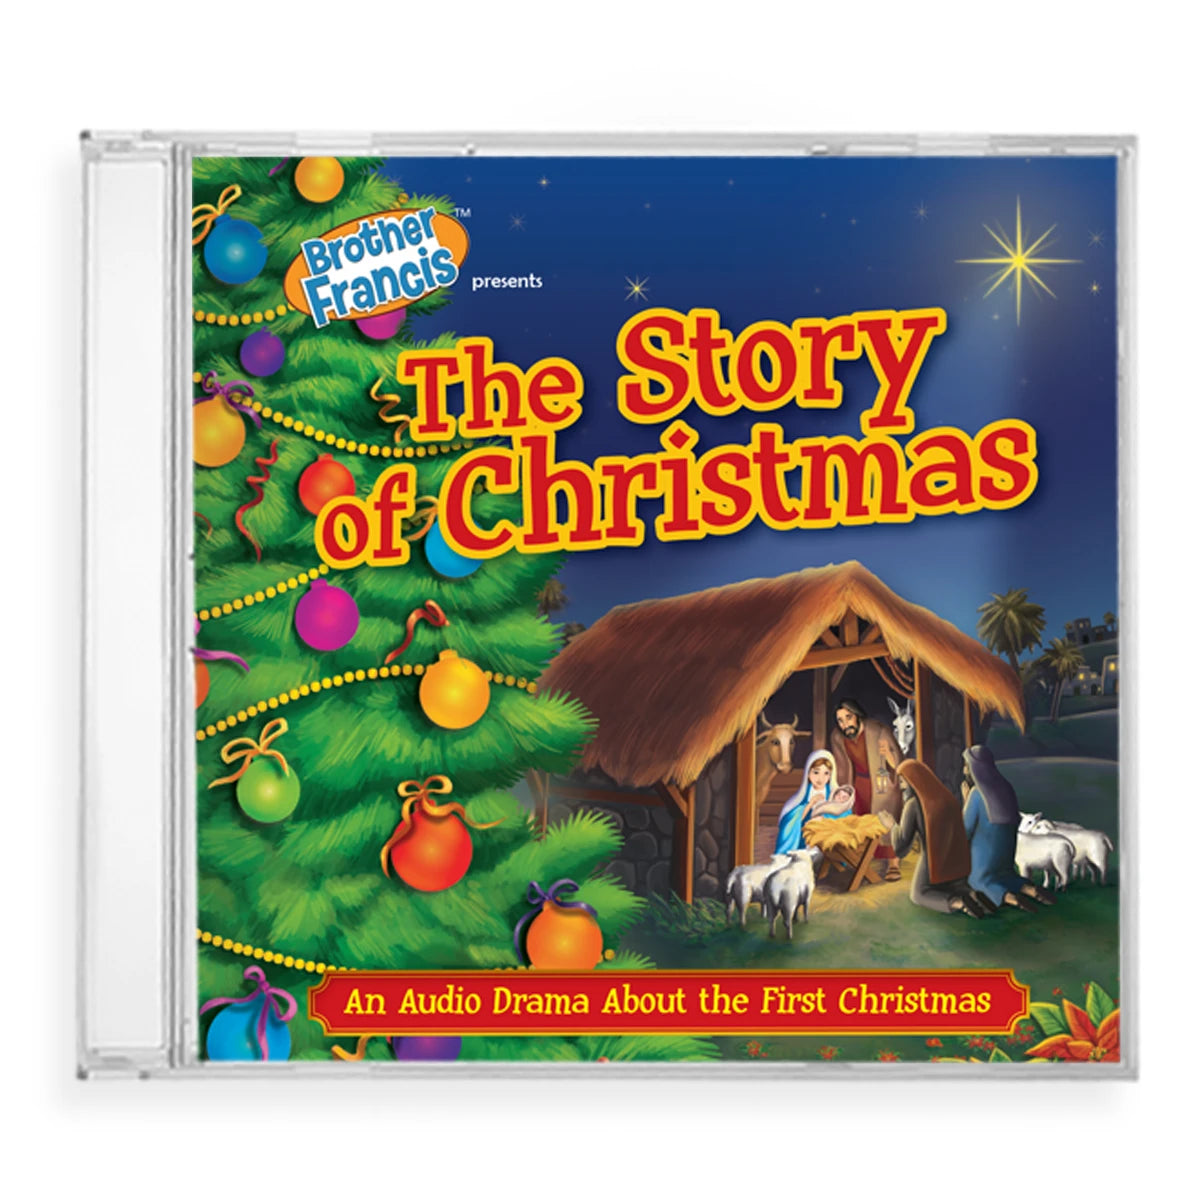 The Story of Christmas - An Audio Drama About the First Christmas